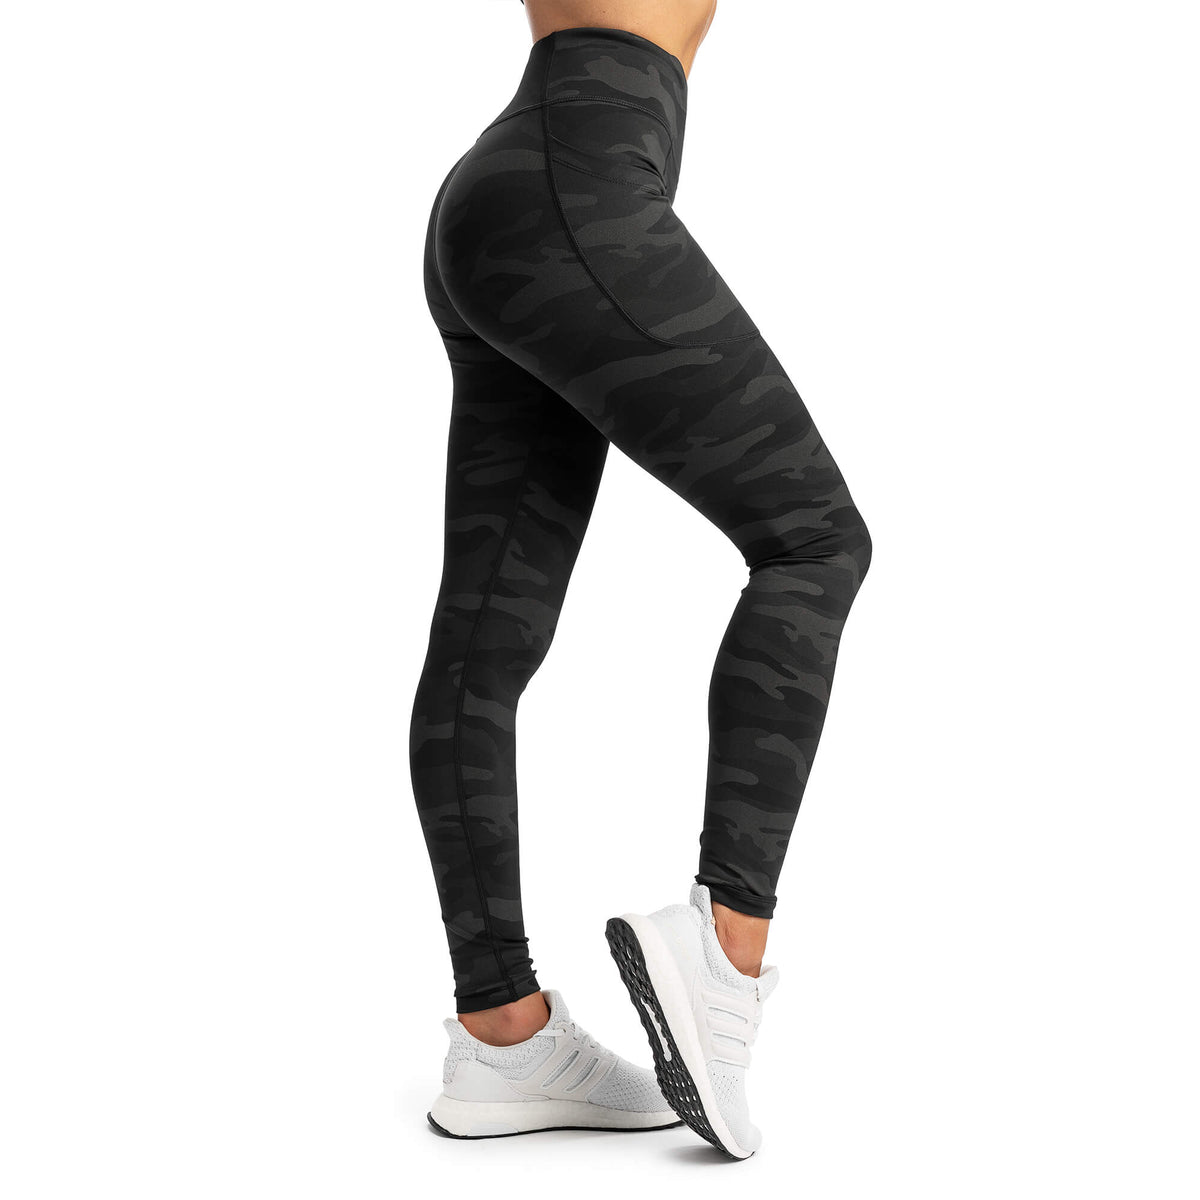 Yogalicious Lux Activewear Leggings XS Black Gray Camo Side Pockets  Camouflage - Pioneer Recycling Services